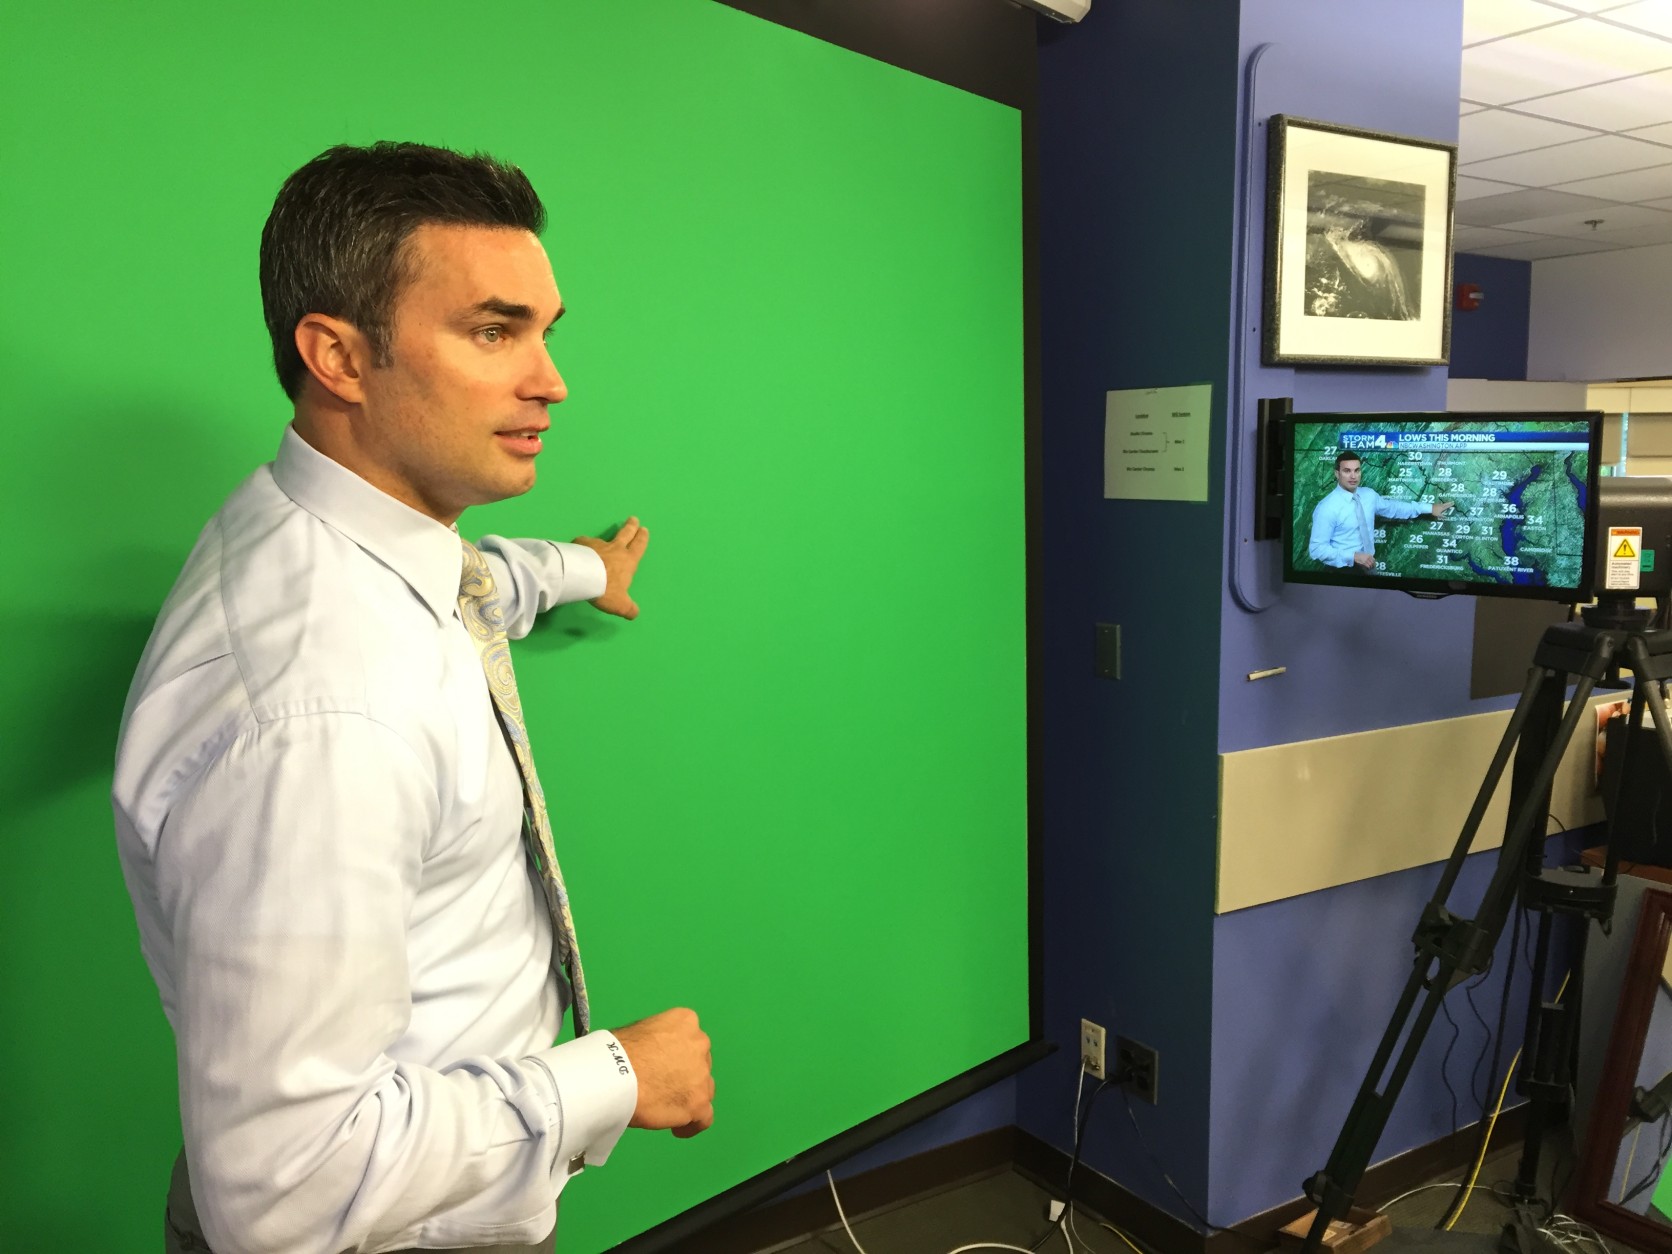 This is how NBC 4 Chief Meteorologist Doug Kammerer looks in real life when you see him pointing to a weather map on TV. Ah, the magic of the green screen. (WTOP/Michelle Basch)